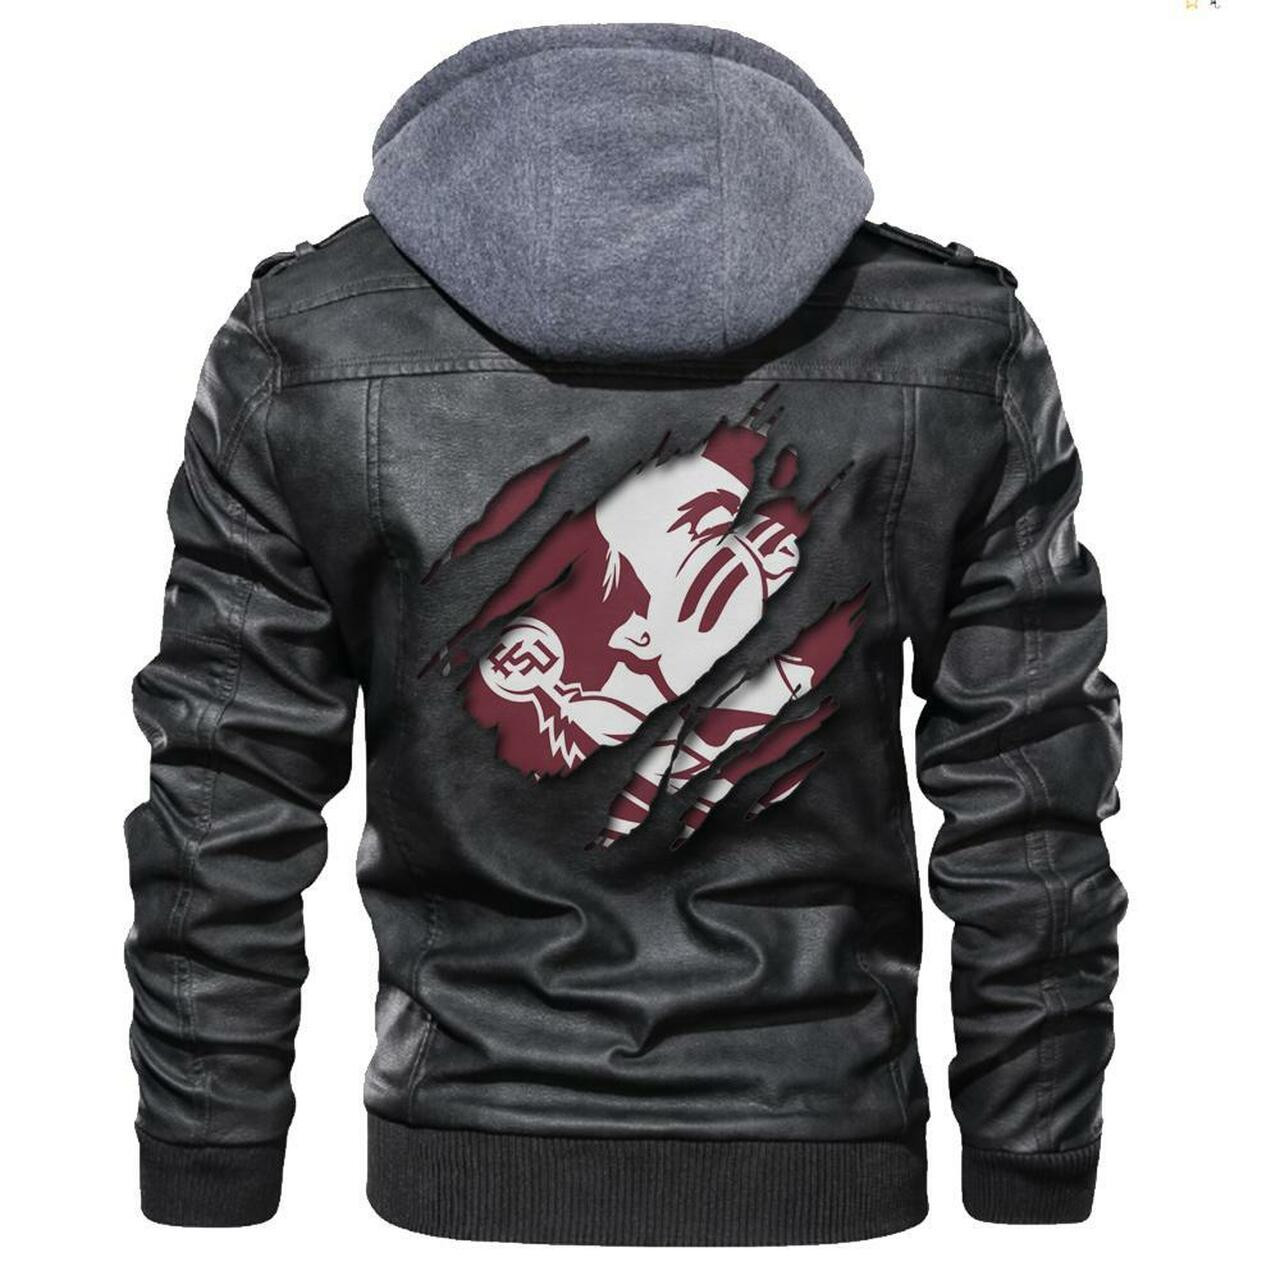 Our store has all of the latest leather jacket 173